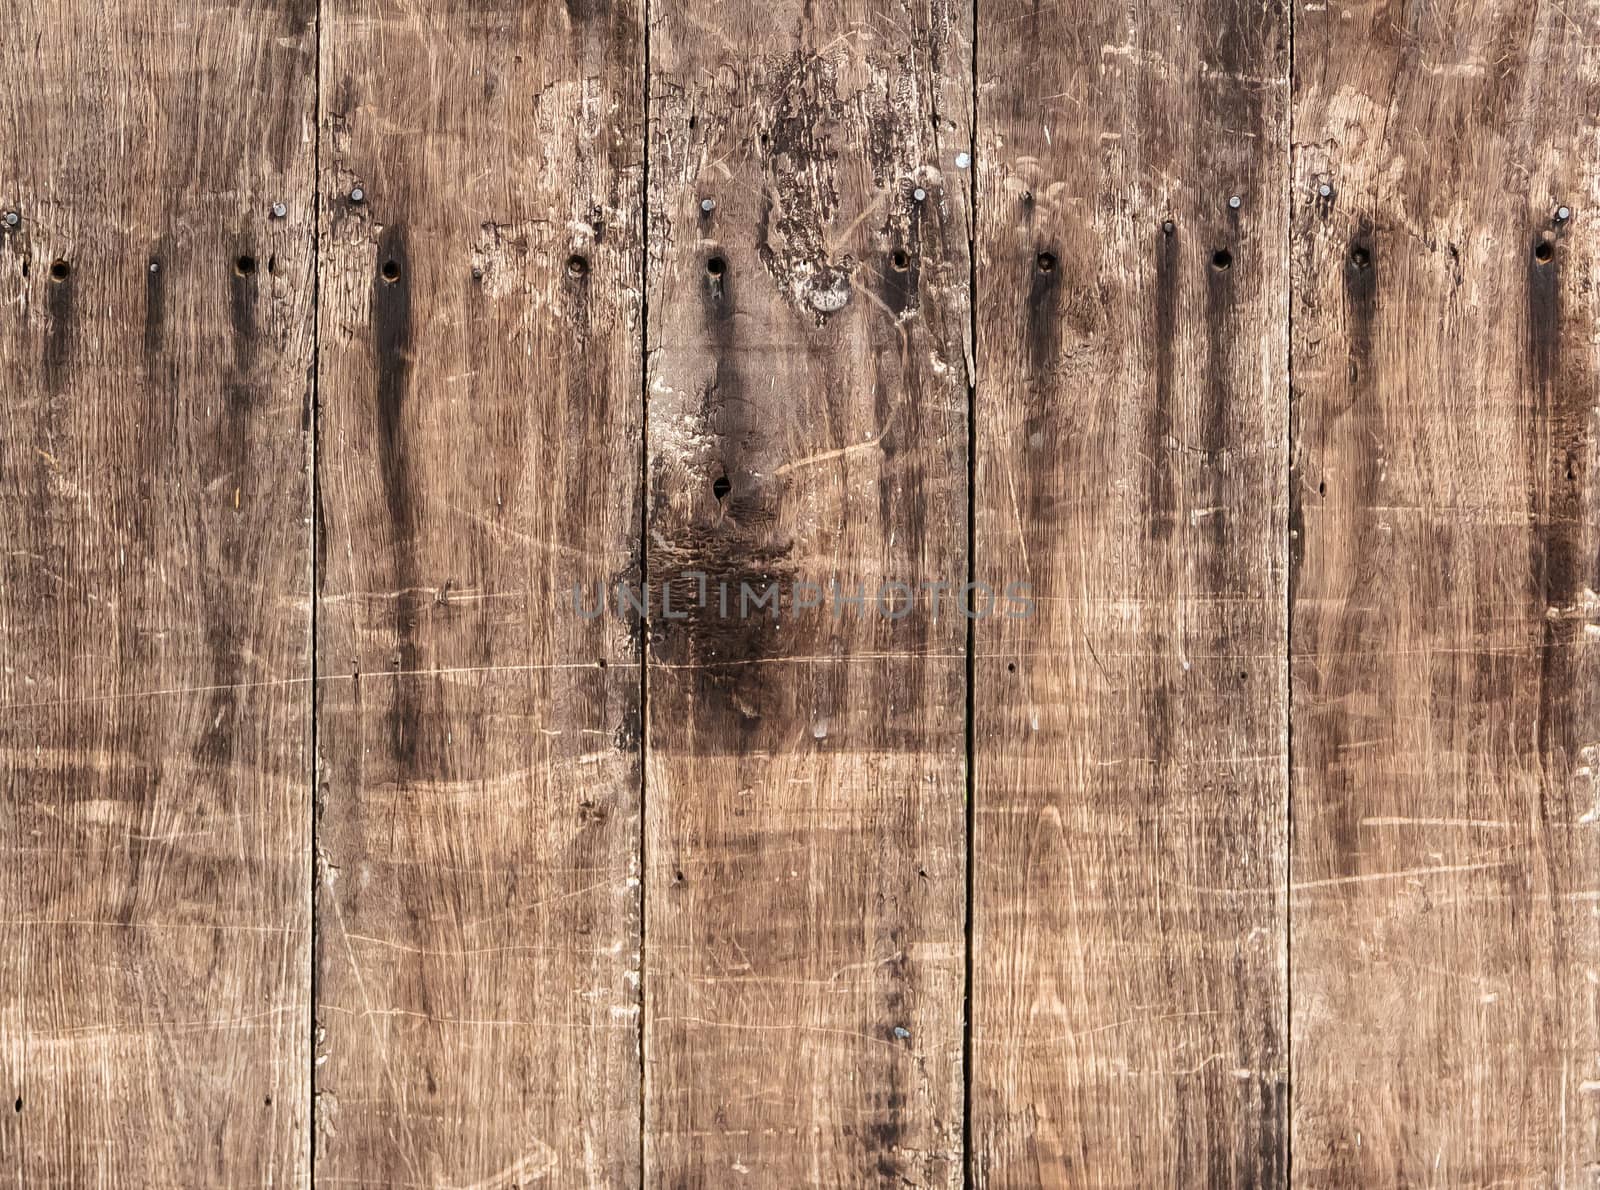 Weathered wood texture background in vertical pattern, natural color.